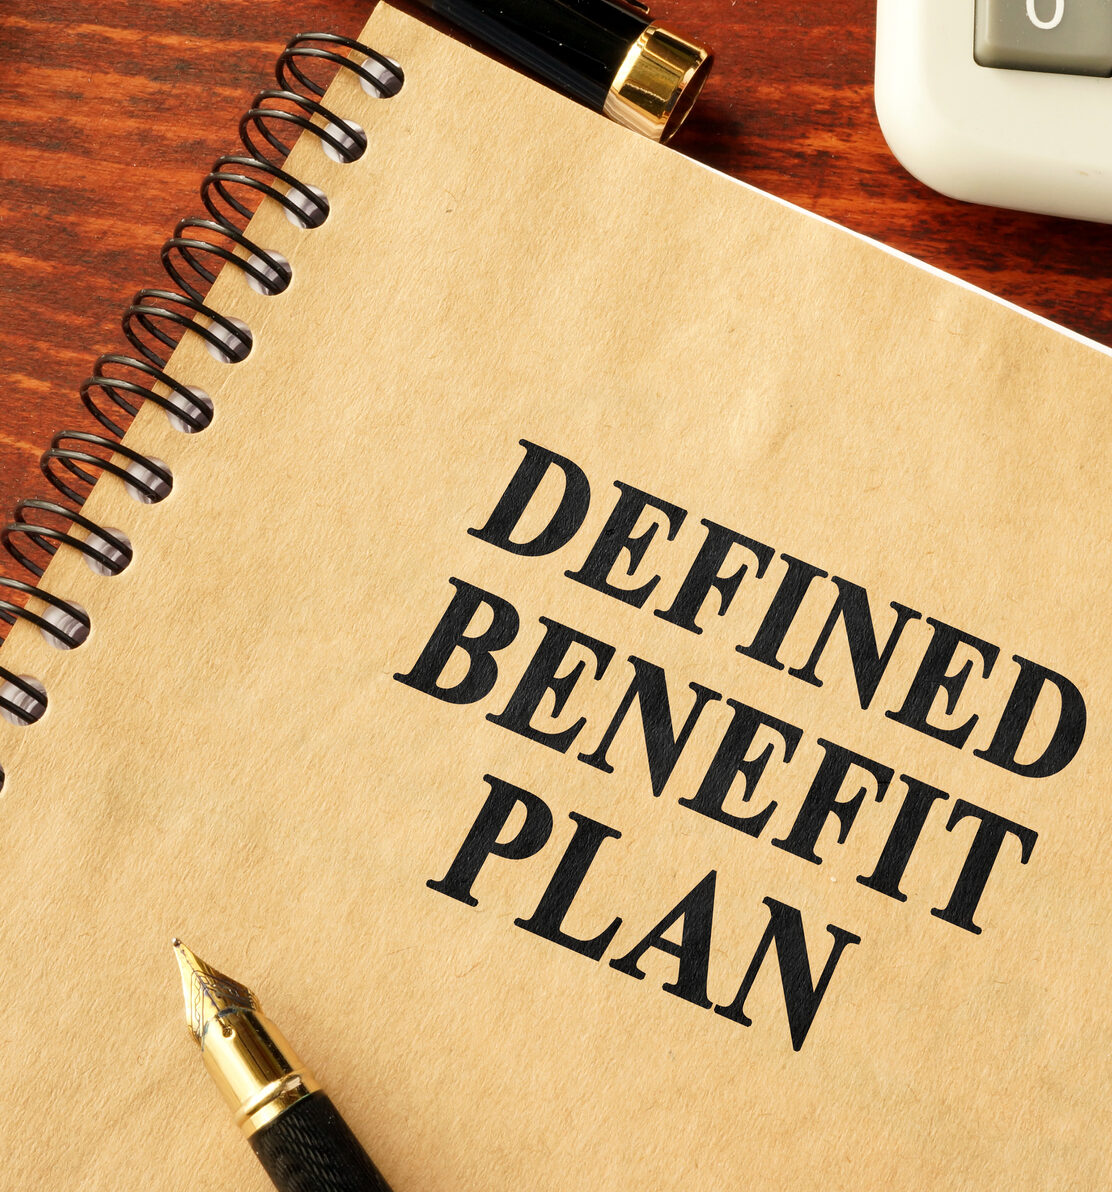 Book with title Defined Benefit Plan